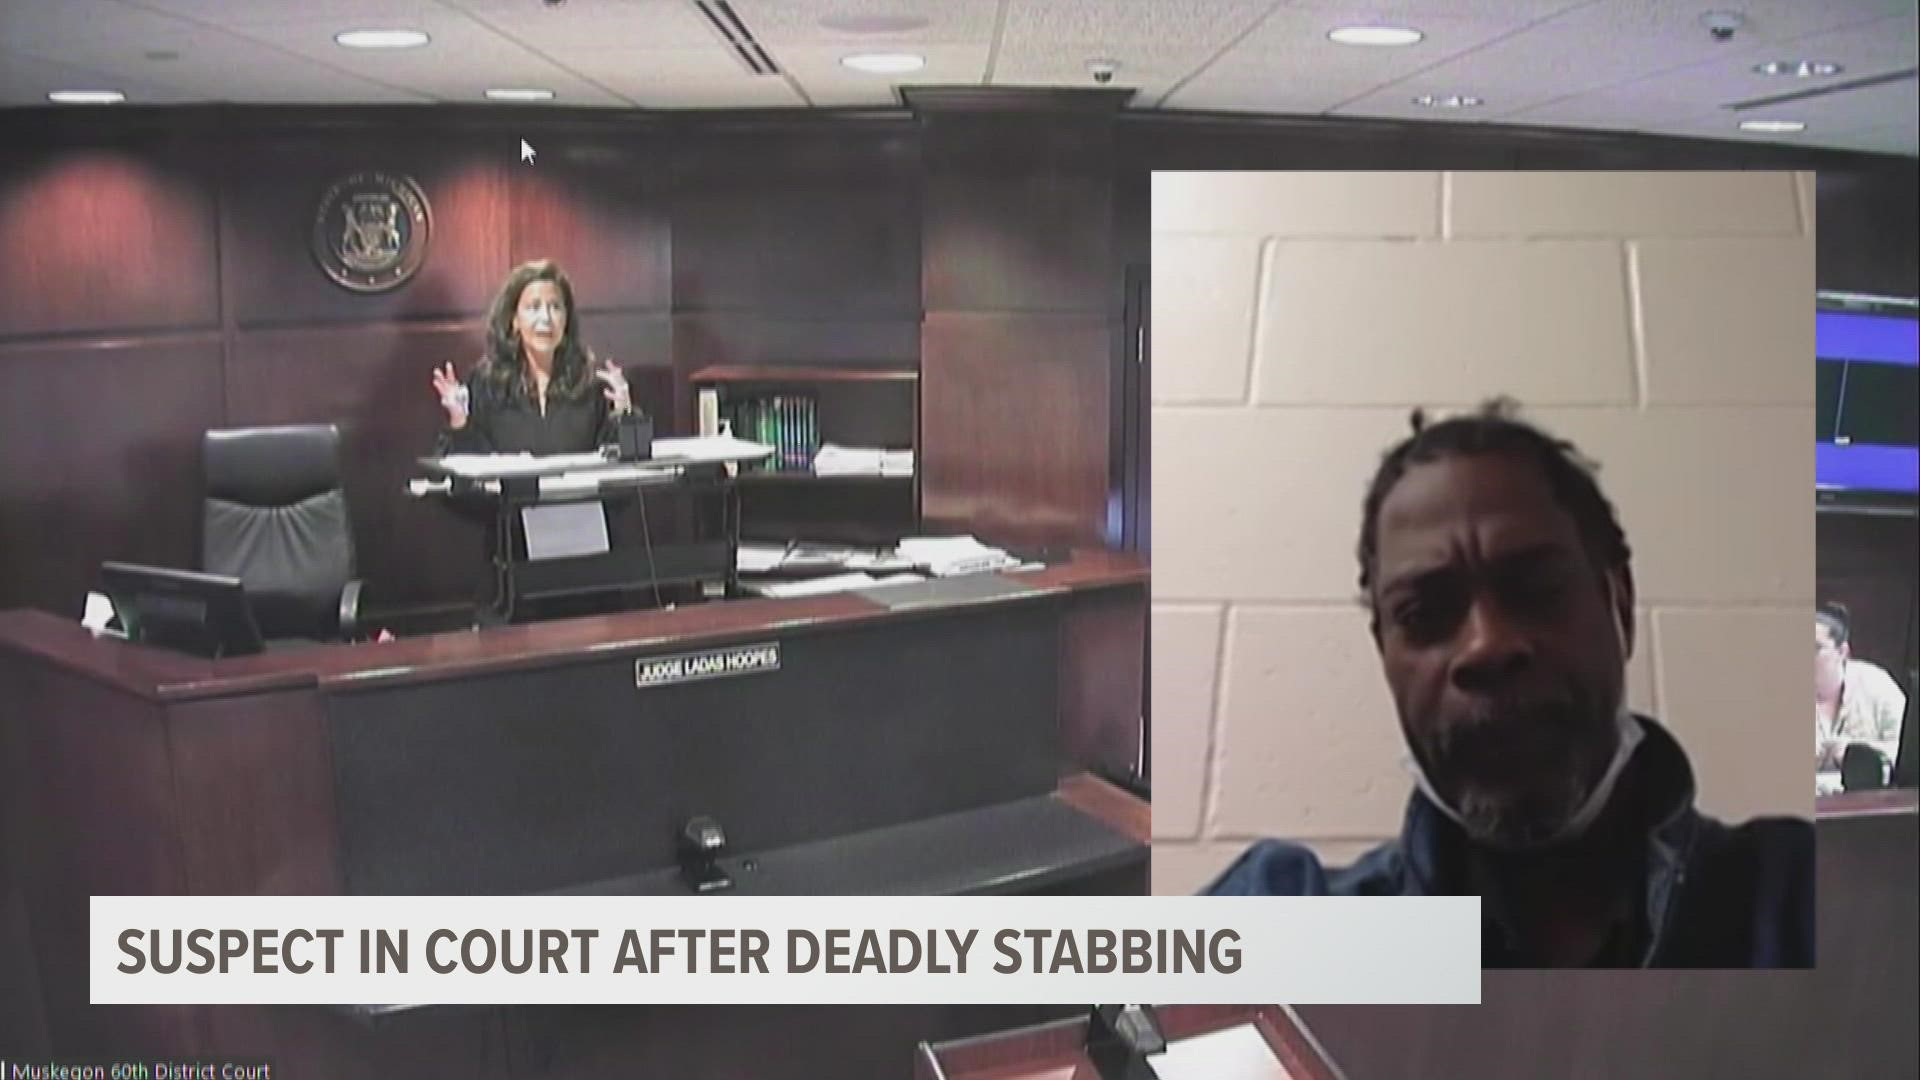 The suspect in a deadly stabbing in Muskegon over the weekend appeared in court Monday.